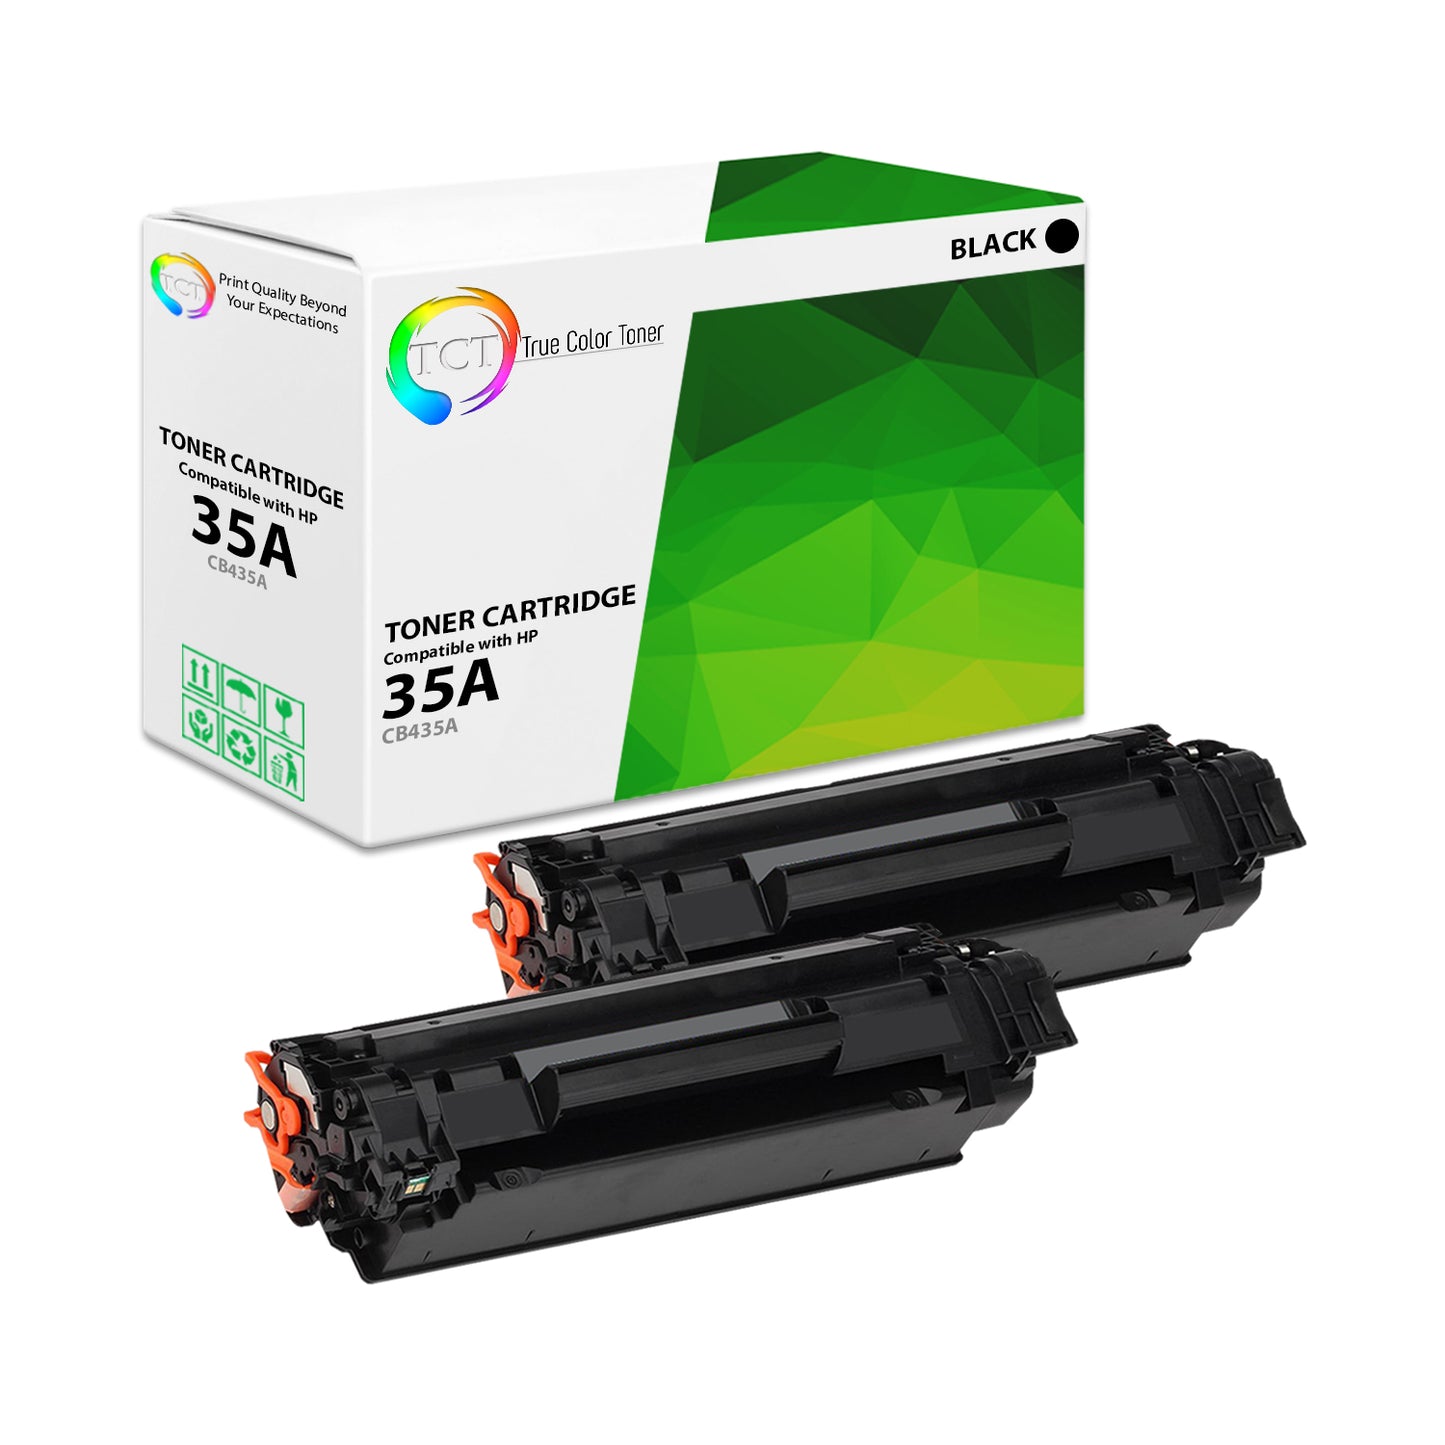 TCT Compatible Toner Cartridge Replacement for the HP 35A Series - 2 Pack Black